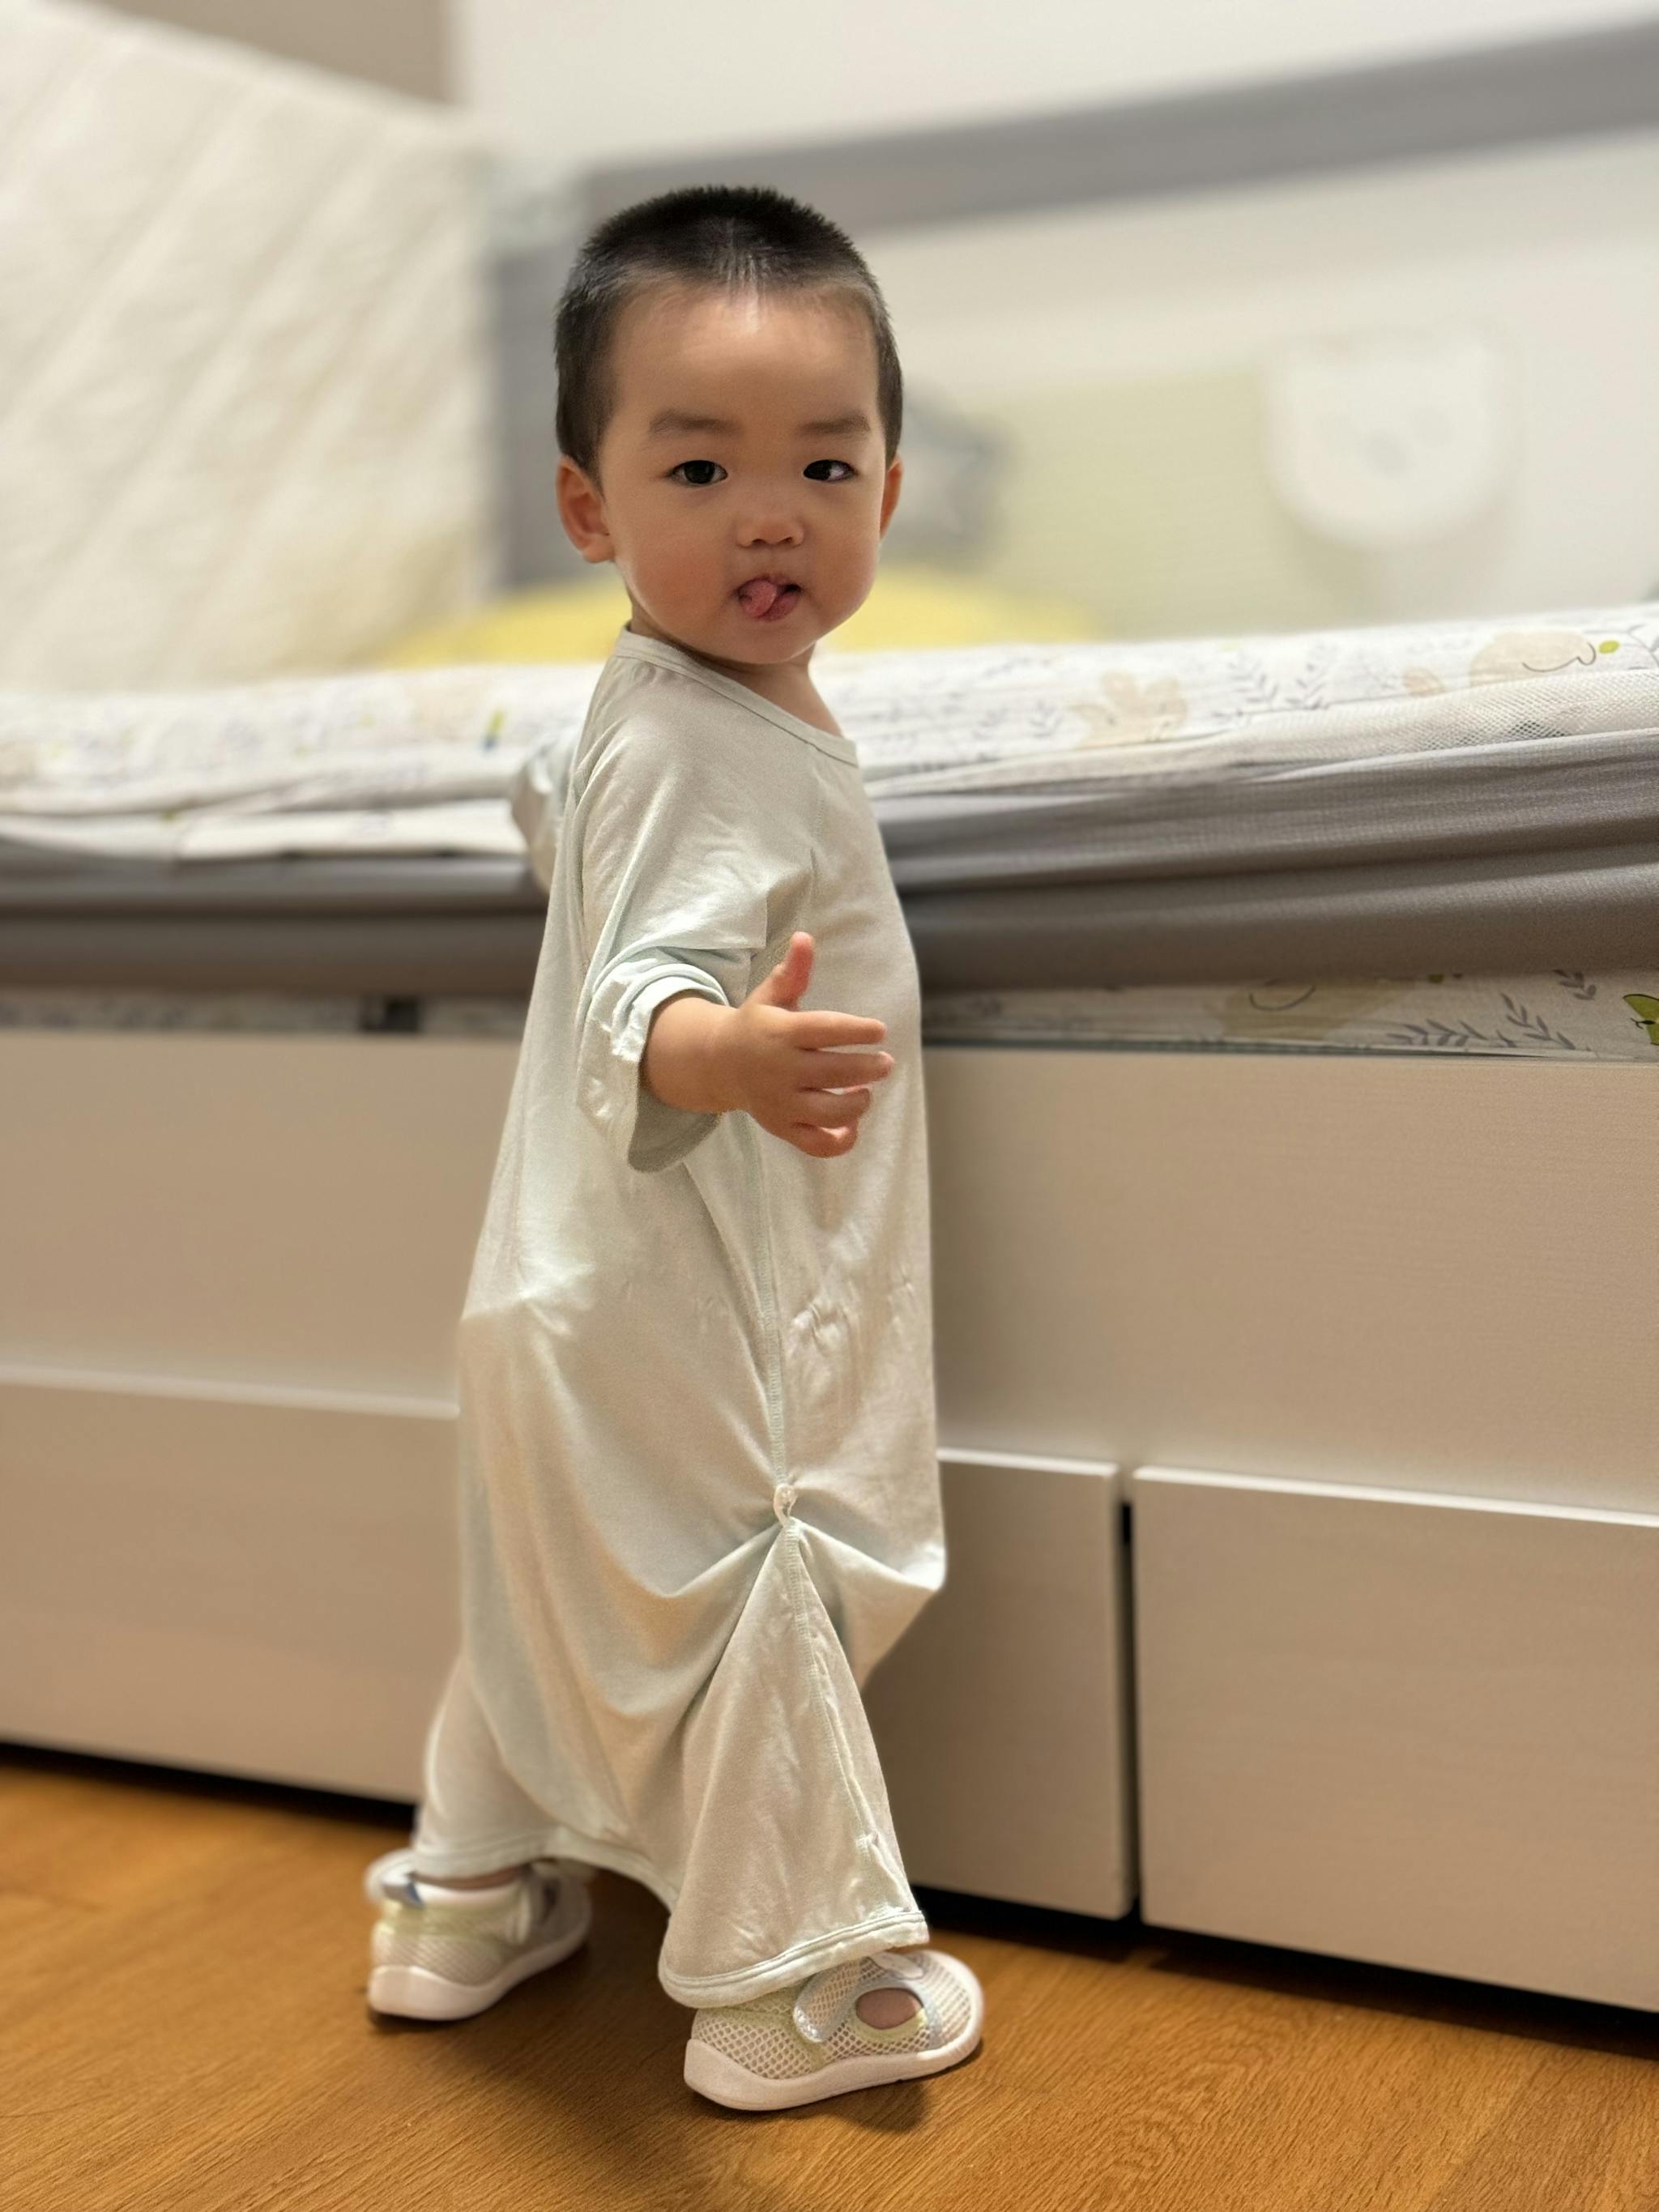 A toddler standing indoors wearing a long white garment with a curious expression, looking over their shoulder